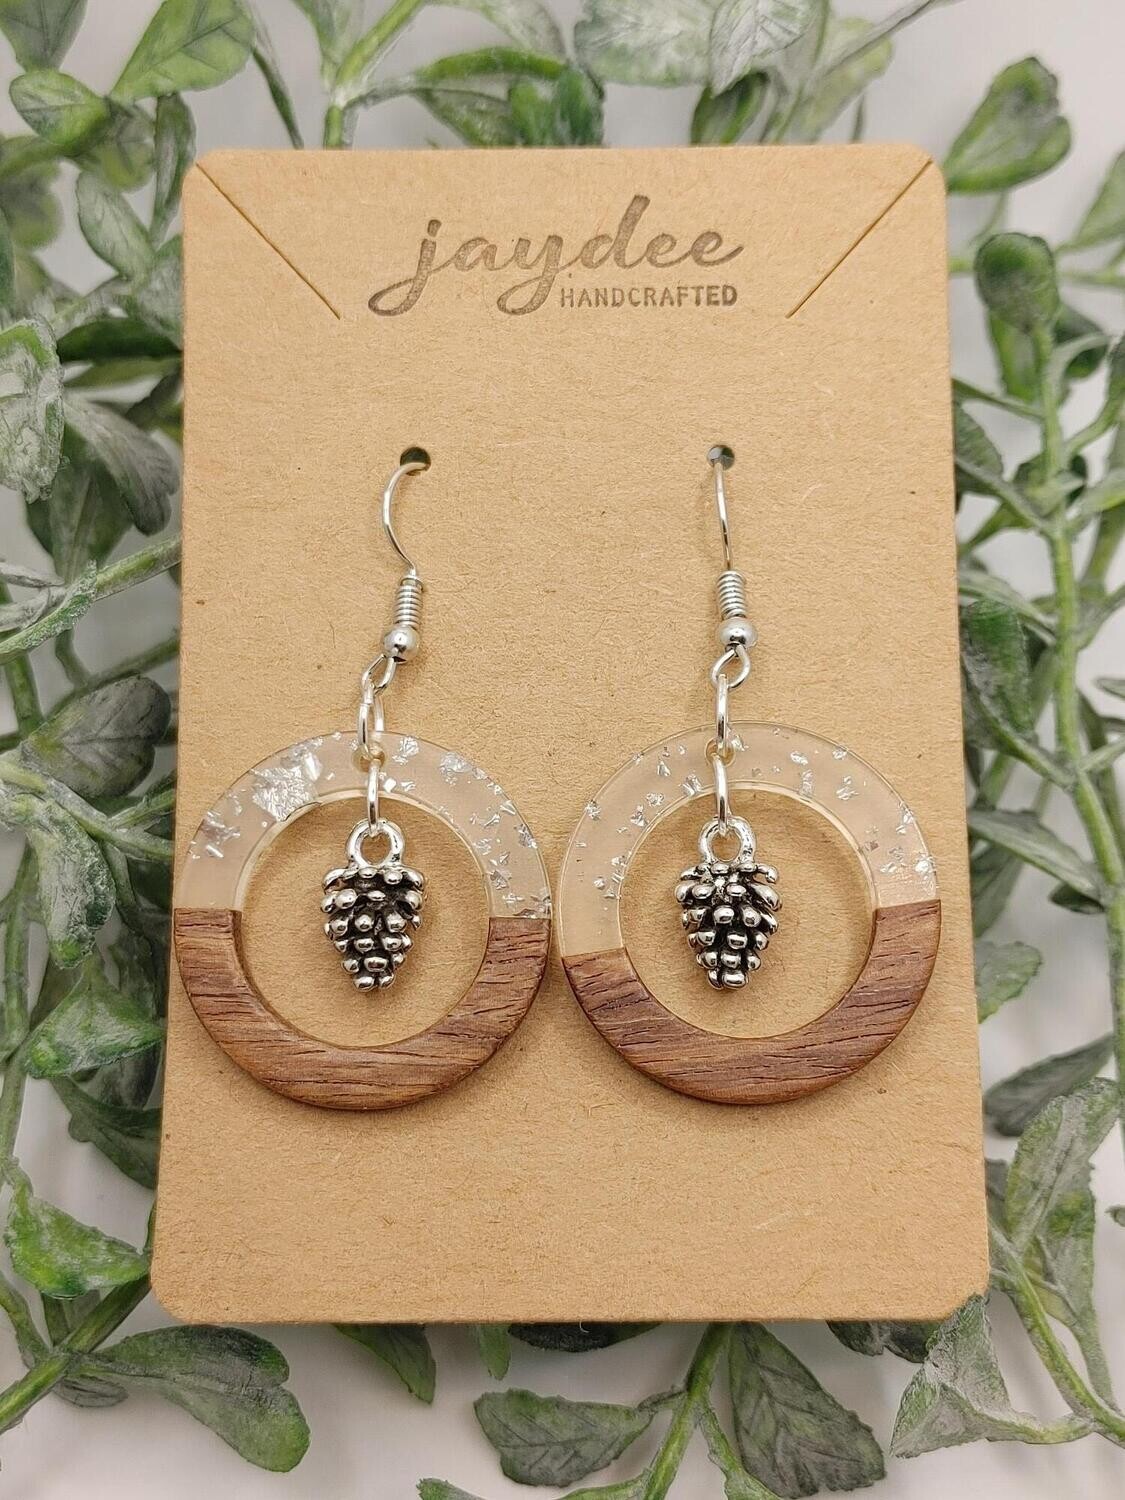 Earrings: White Resin/Wood with Berry Charm